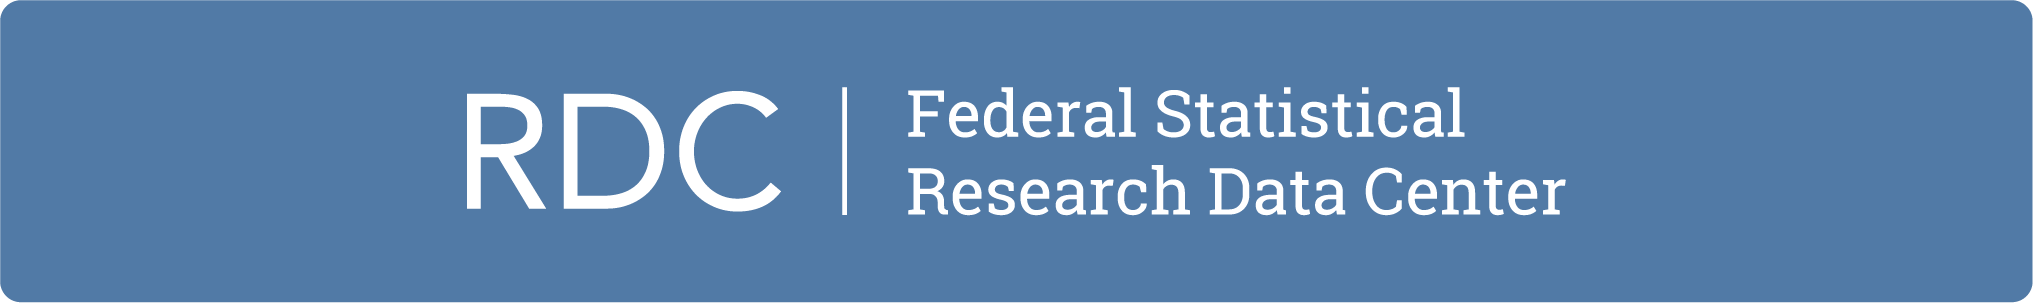 RDC | Federal Statistical Research Data Center